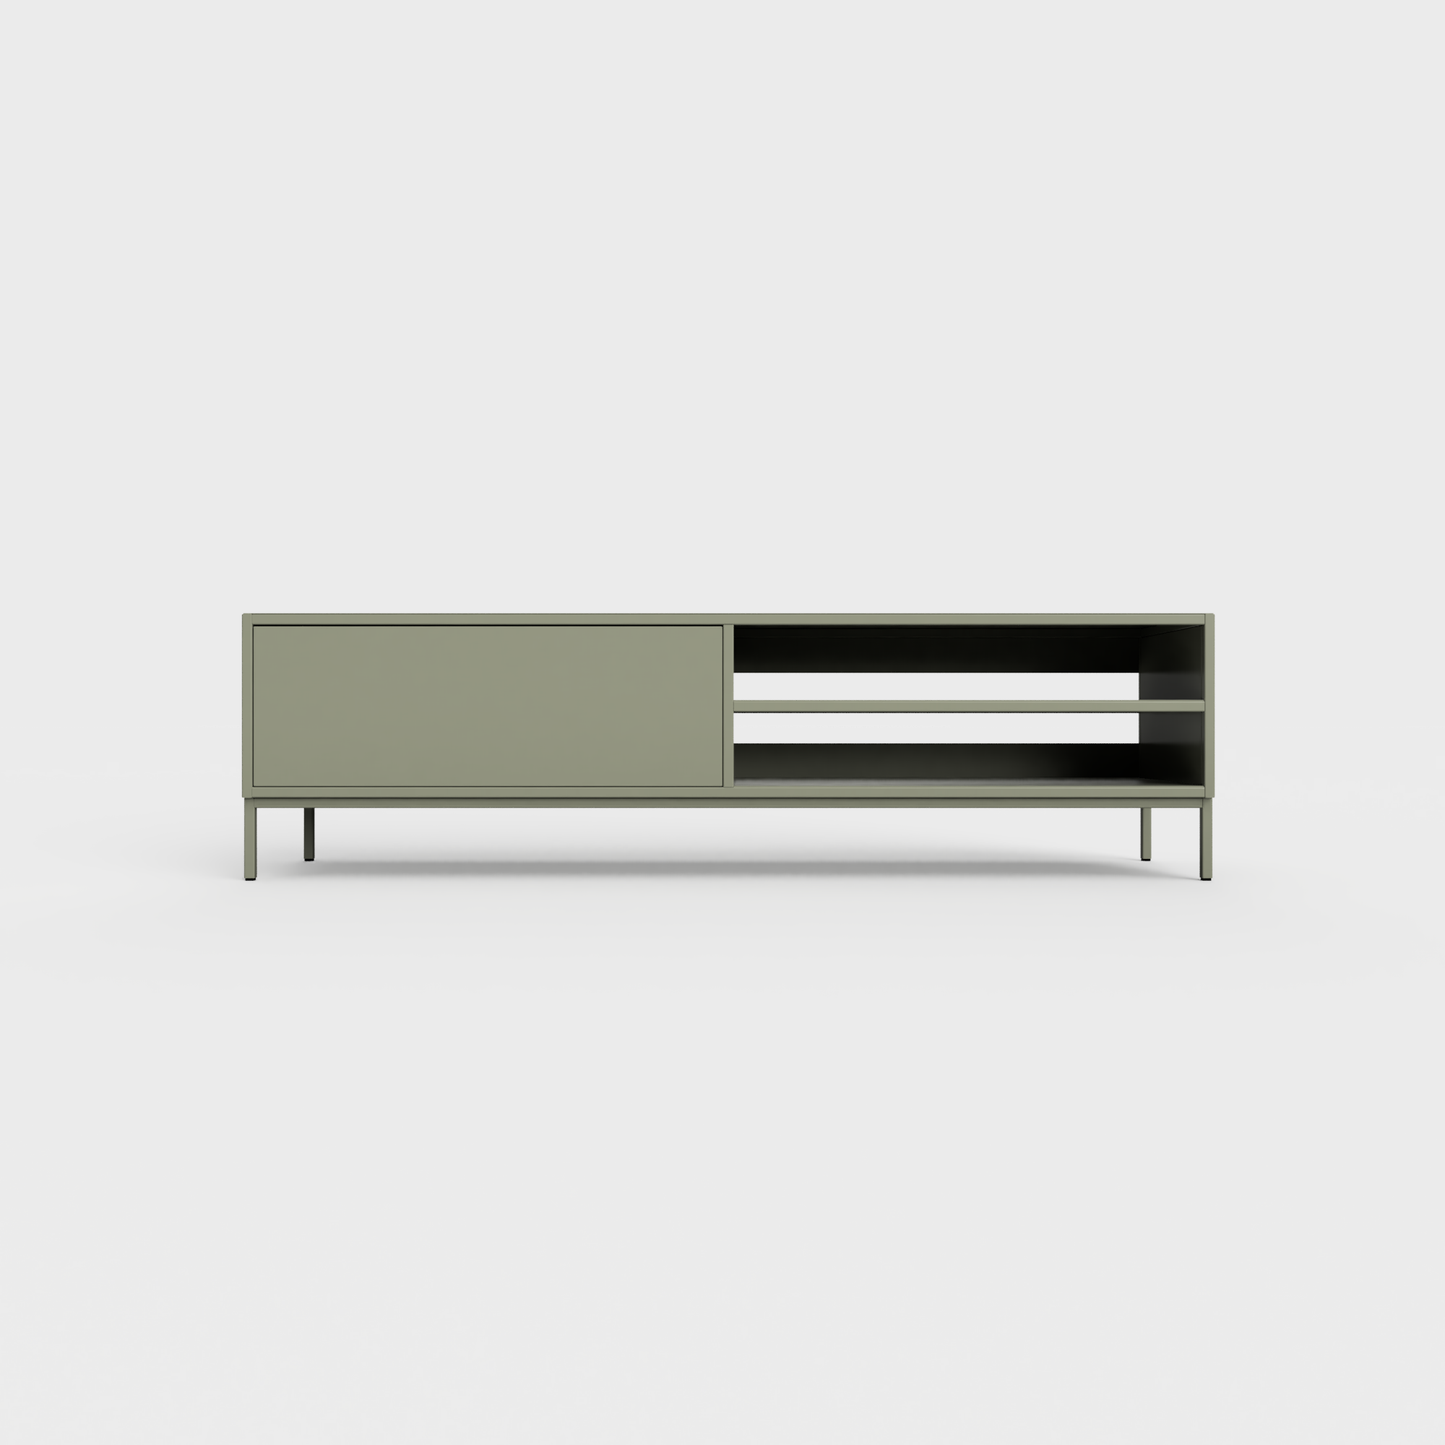 Prunus 02 Lowboard in Faded Olive color, powder-coated steel, elegant and modern piece of furniture for your living room